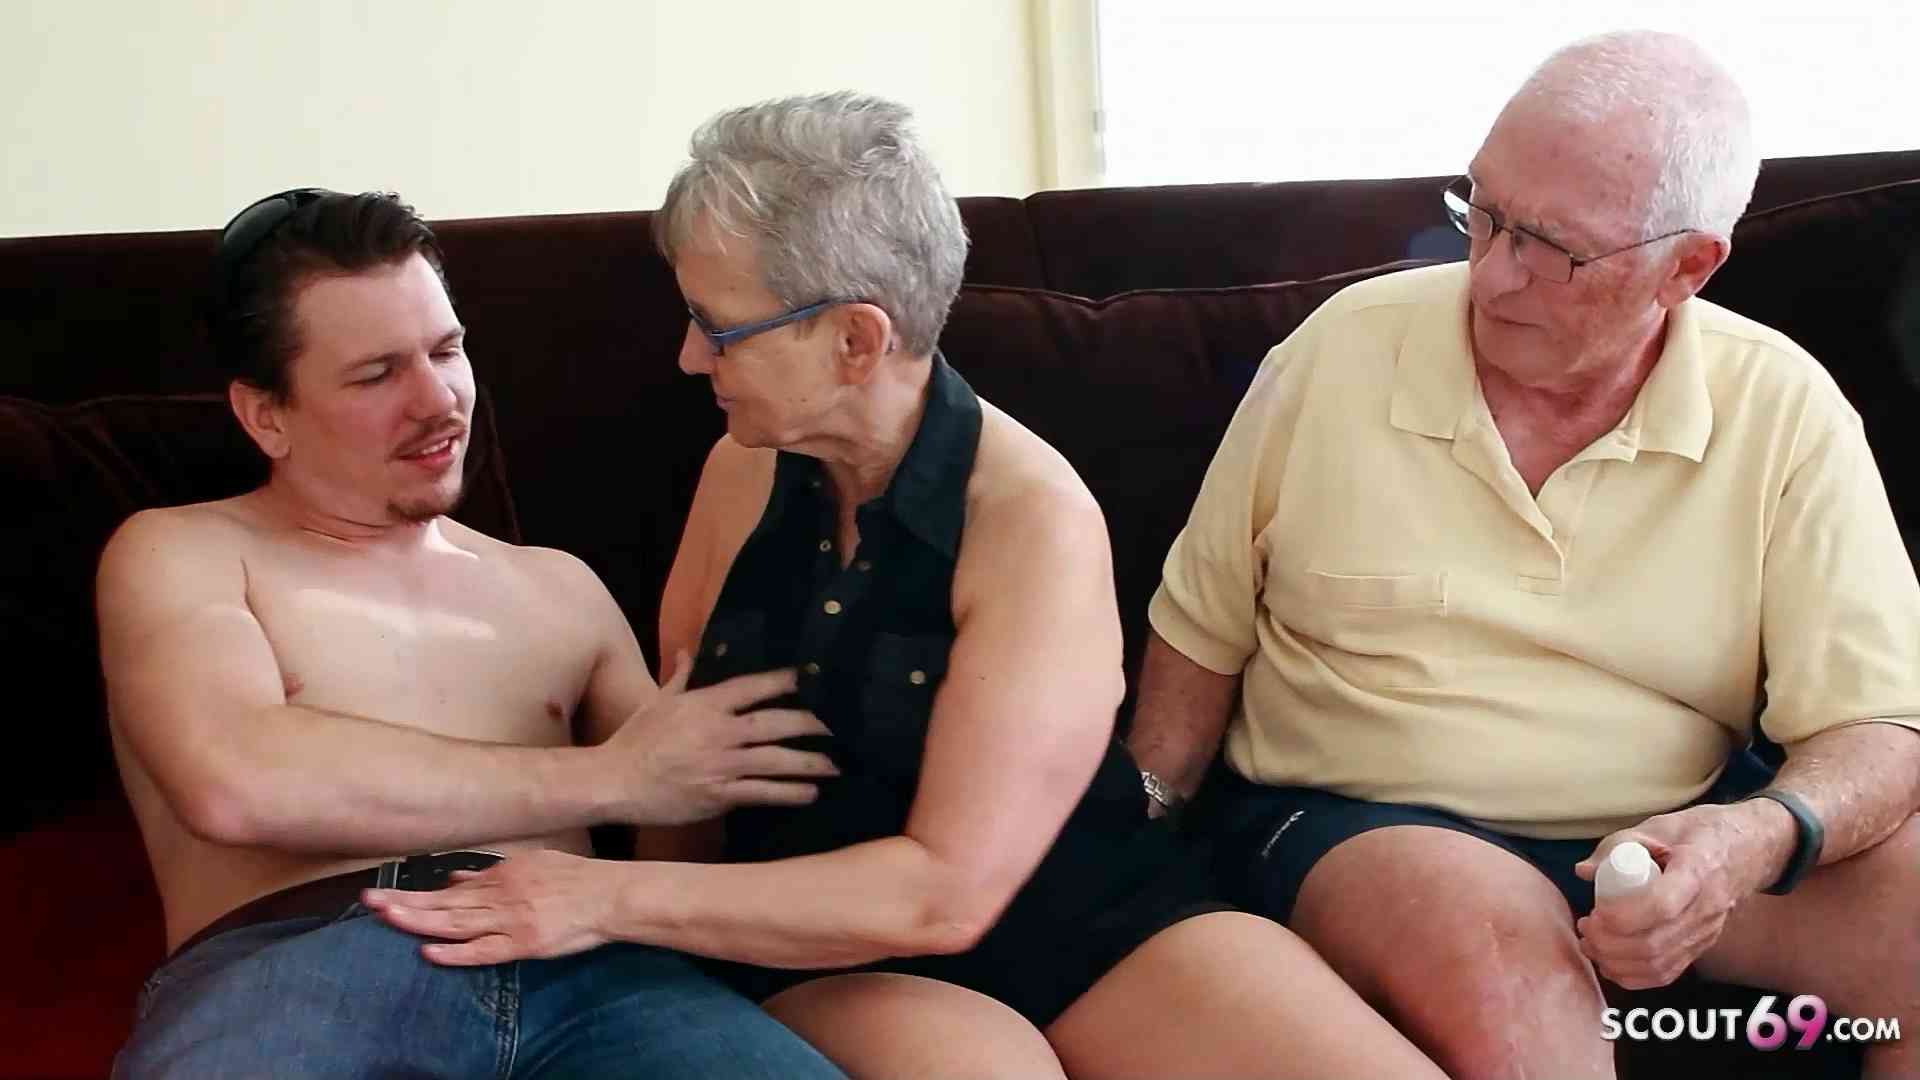 Old Granny Wife and husband at First MMF Threesome Sex with Big Dick Boy